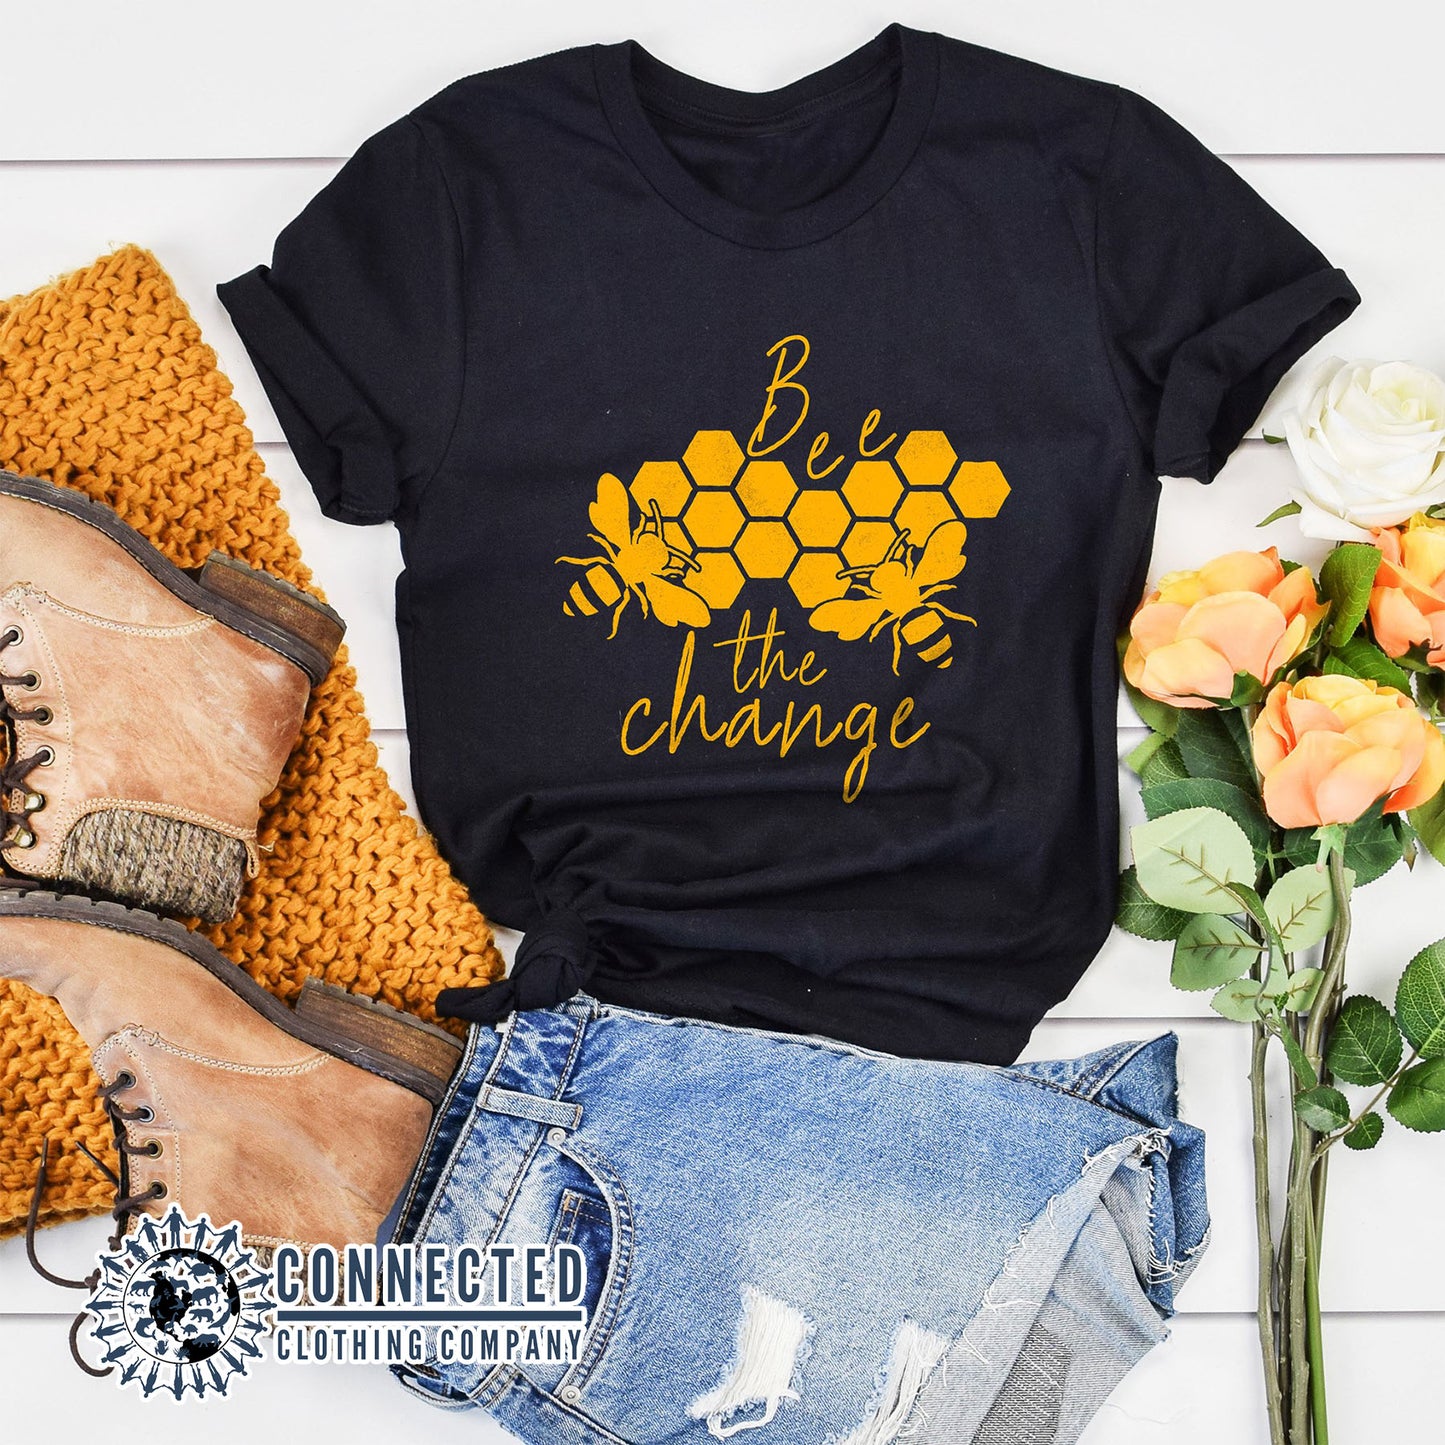 Black Organic Cotton Bee The Change Short-Sleeve Tee - sharonkornman - Ethically and Sustainably Made - 10% of profits donated to the Honeybee Conservancy